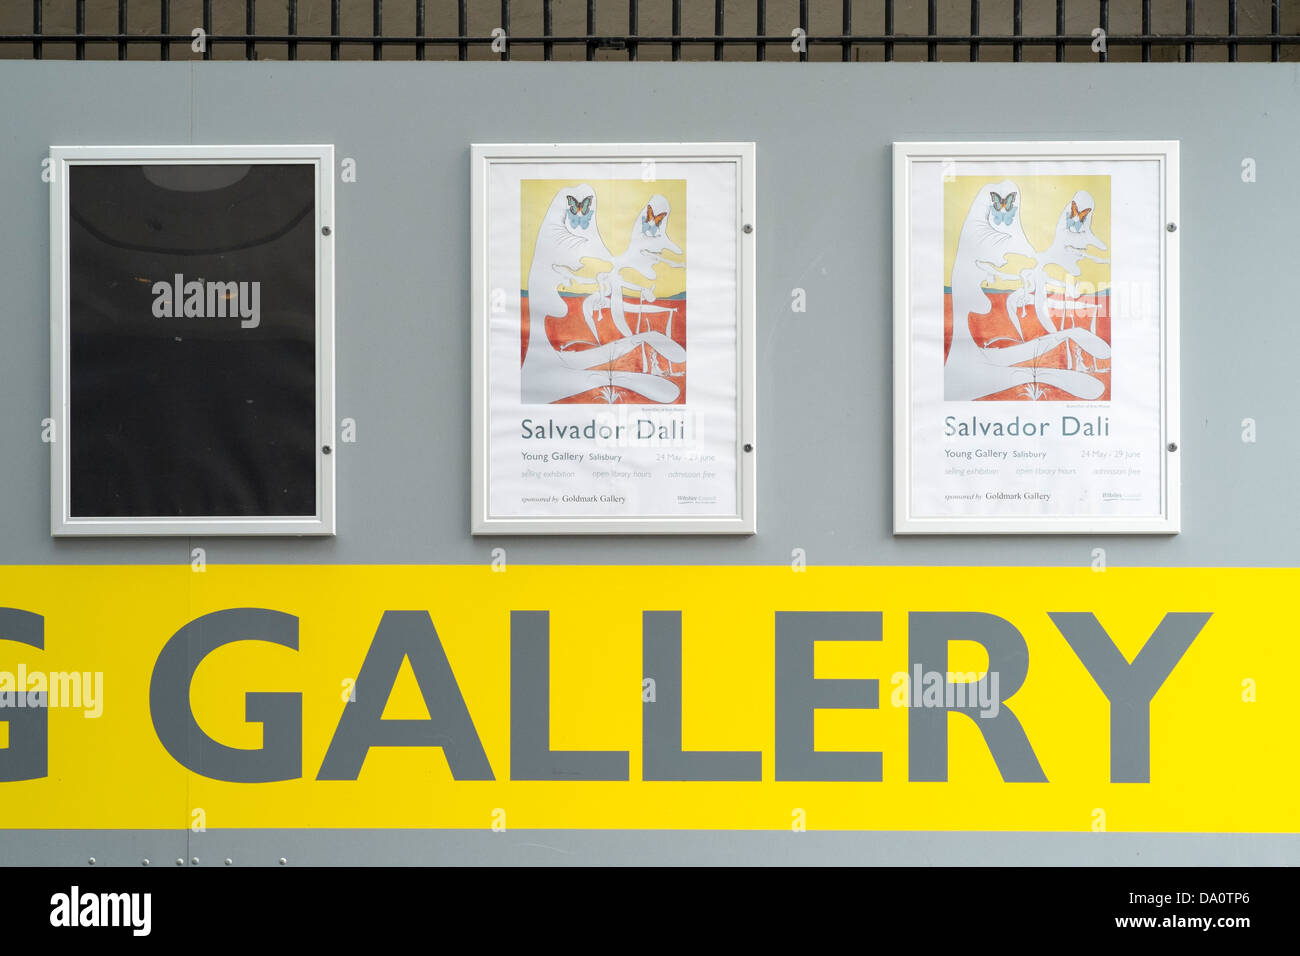 Posters advertising a Salvador Dali painting exhibition in a local art gallery Stock Photo